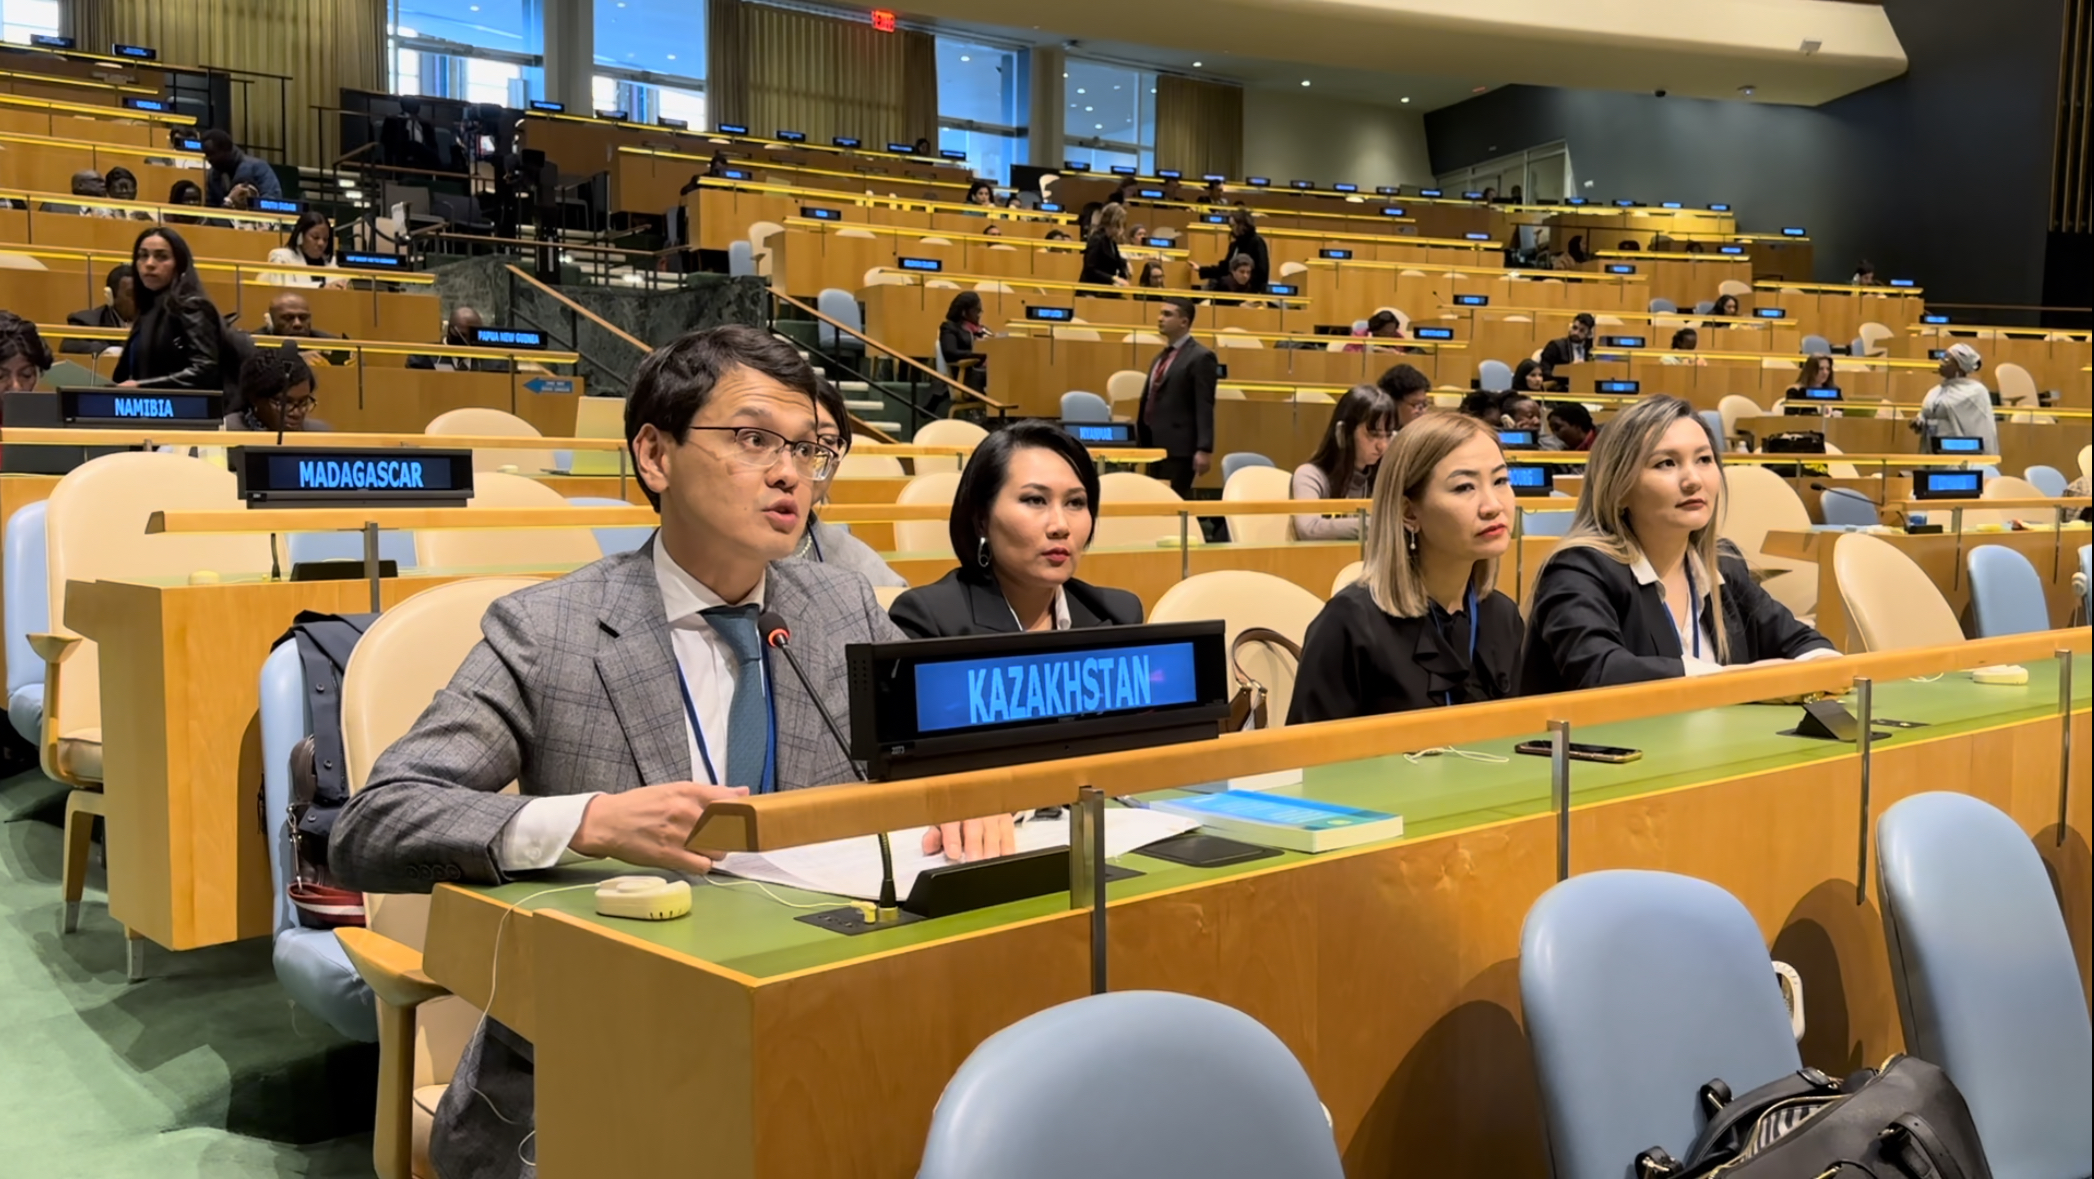 Kazakhstan is taking part in the 67th session of the UN Commission on the Status of Women